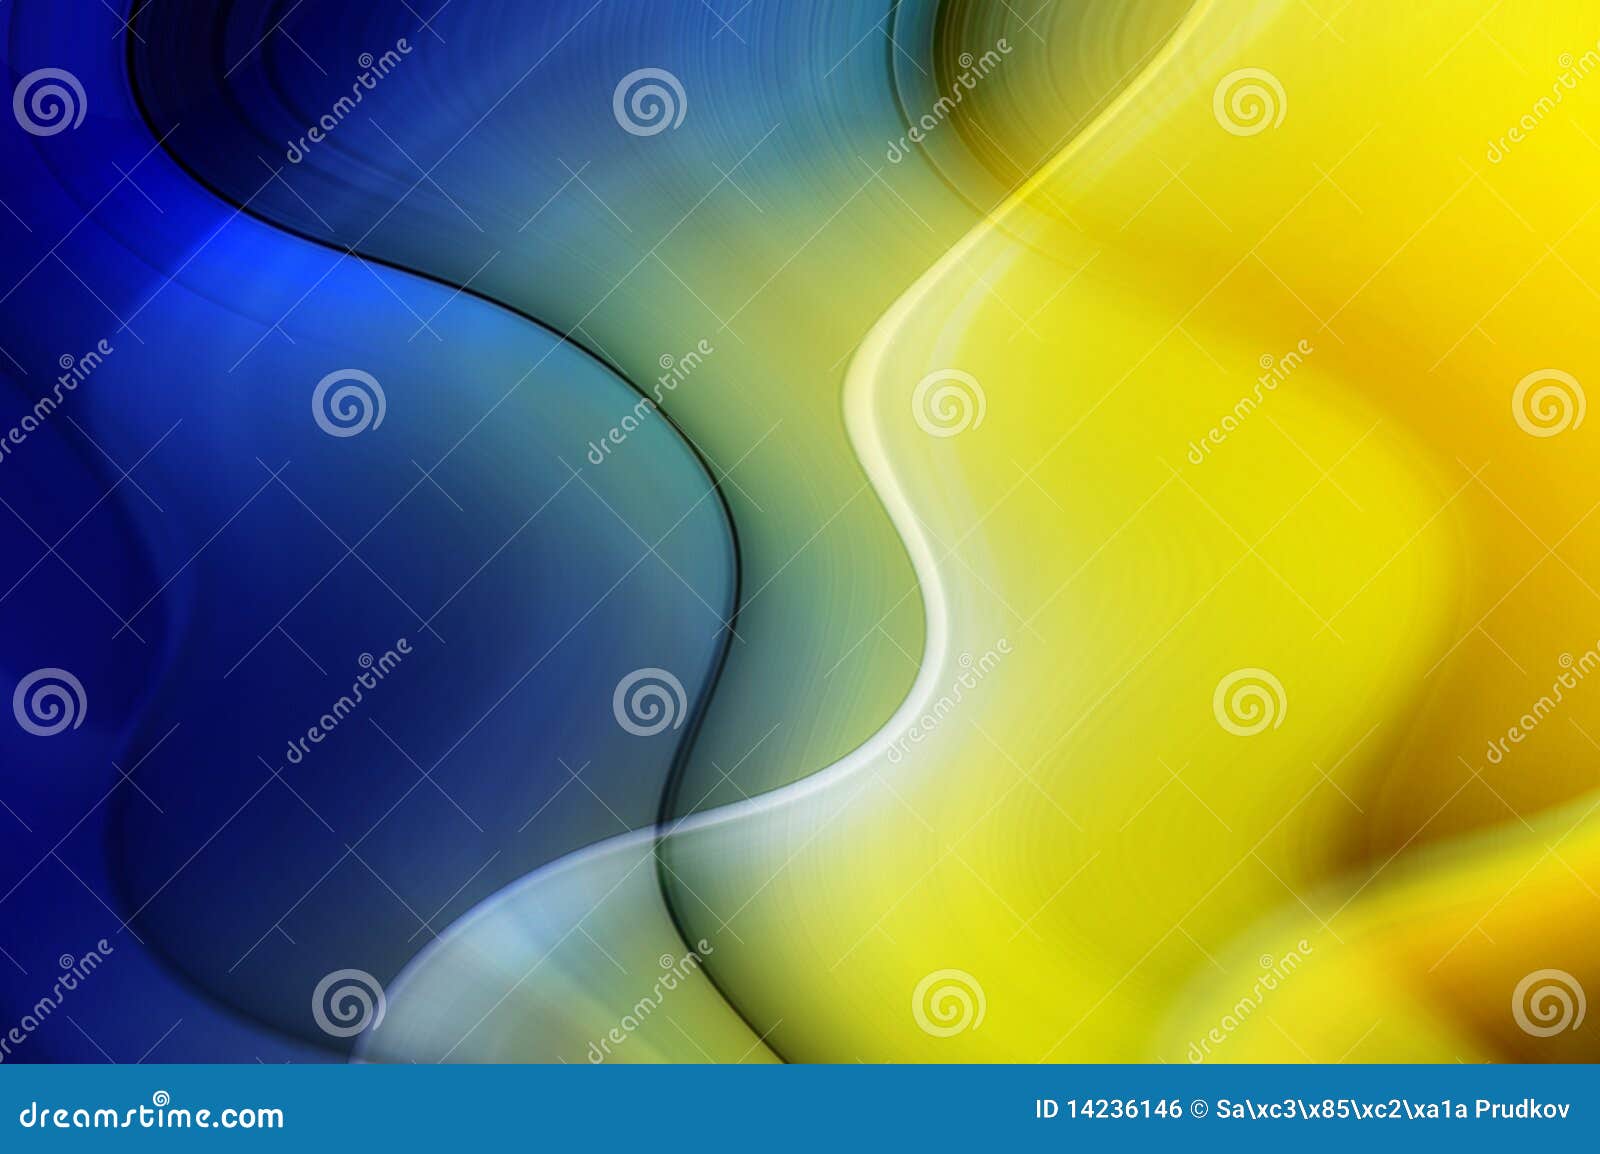 abstract background in blue and yellow tones